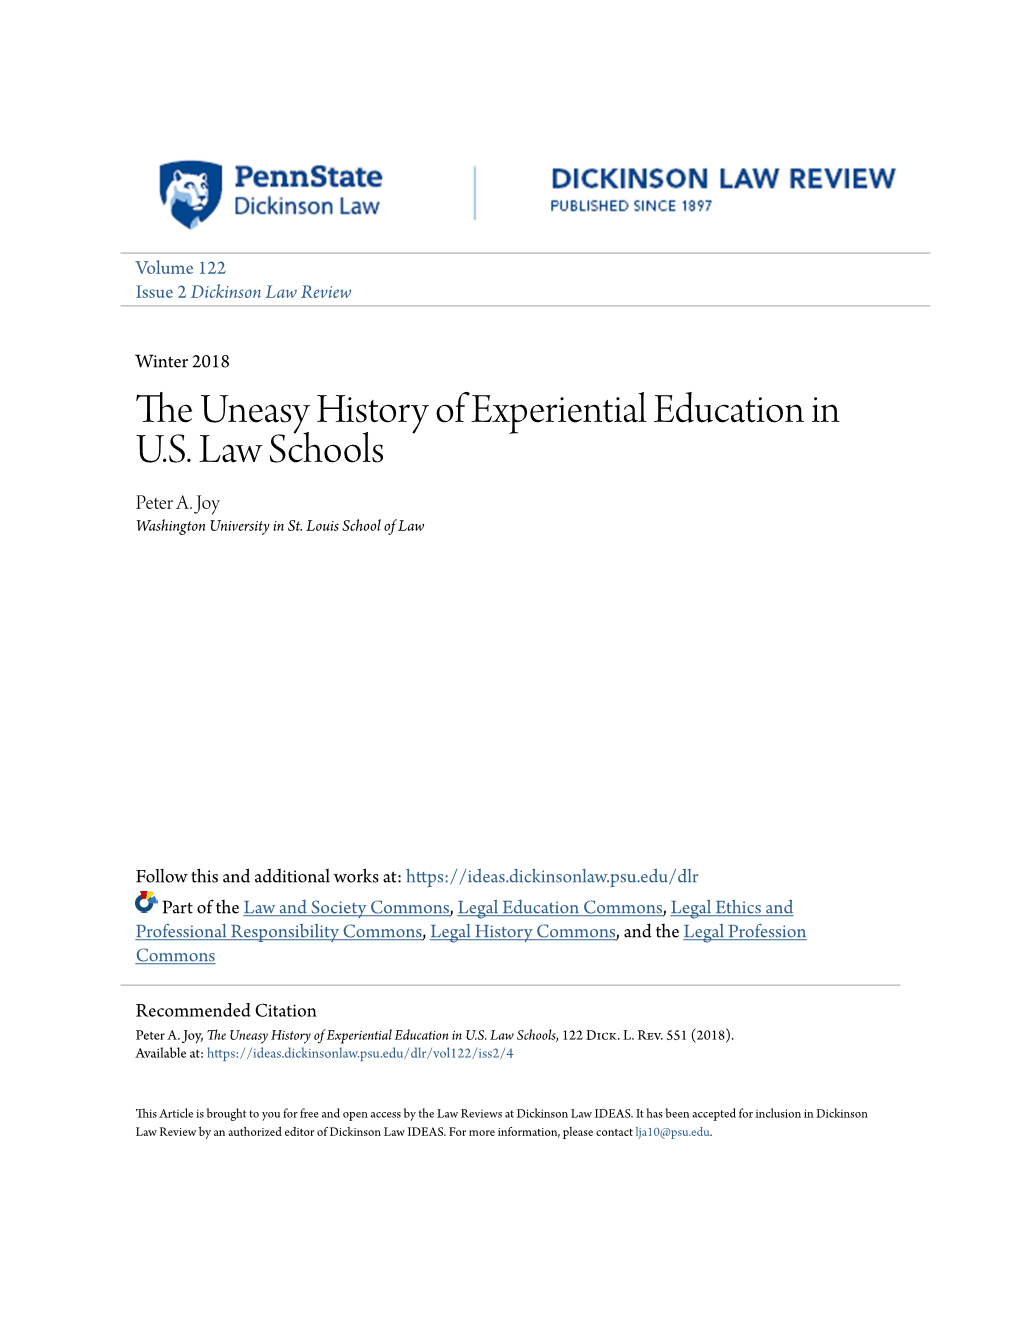 The Uneasy History of Experiential Education in U.S. Law Schools, 122 Dick